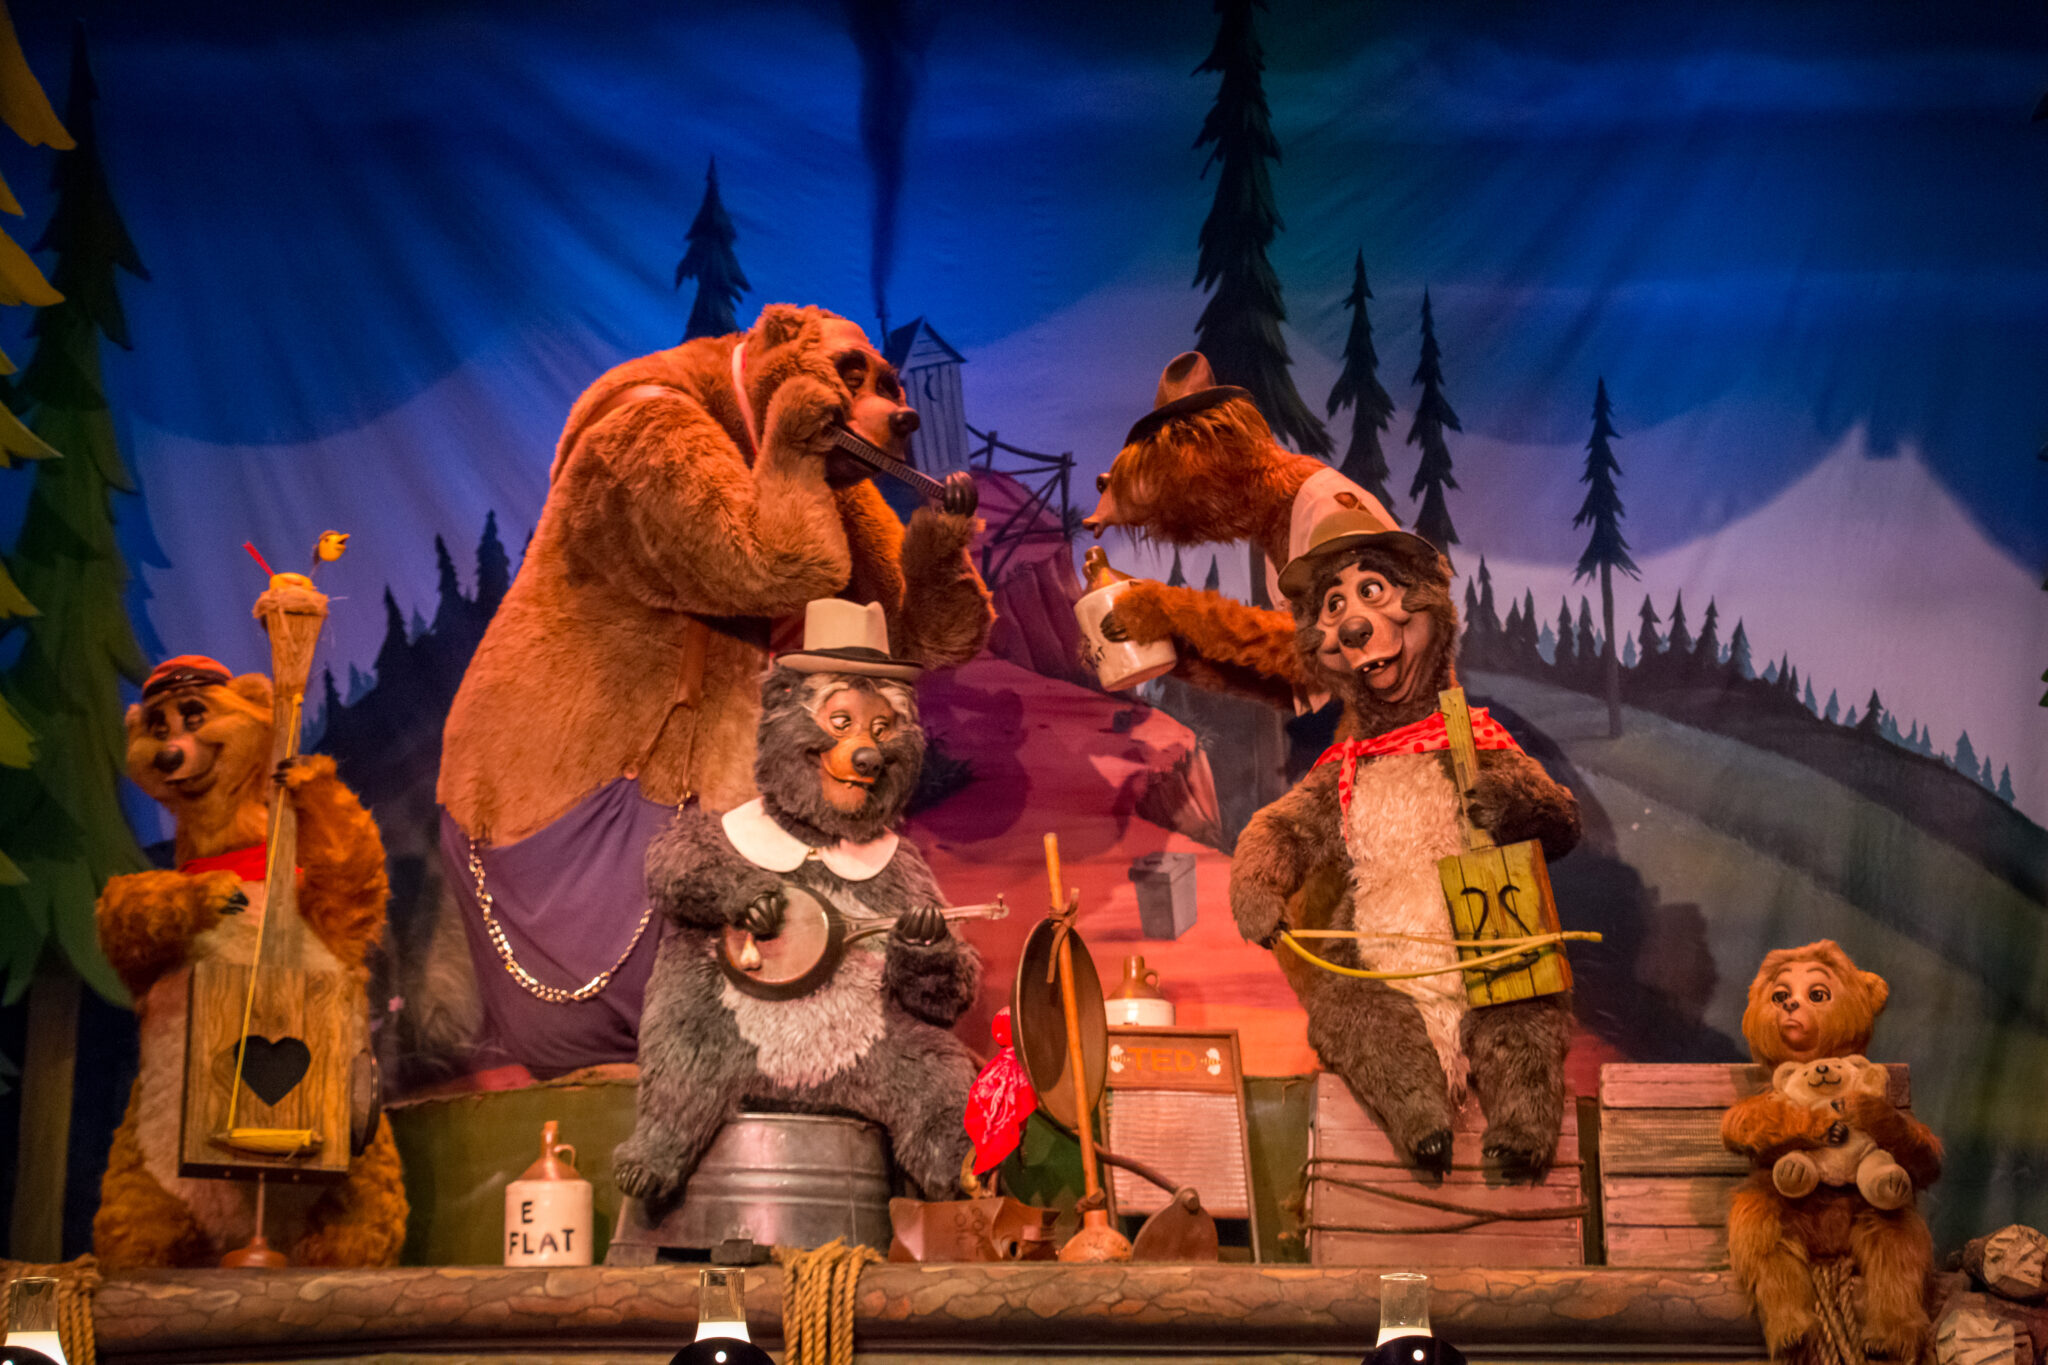 Country Bear Jamboree Overview | Disney's Magic Kingdom Attractions